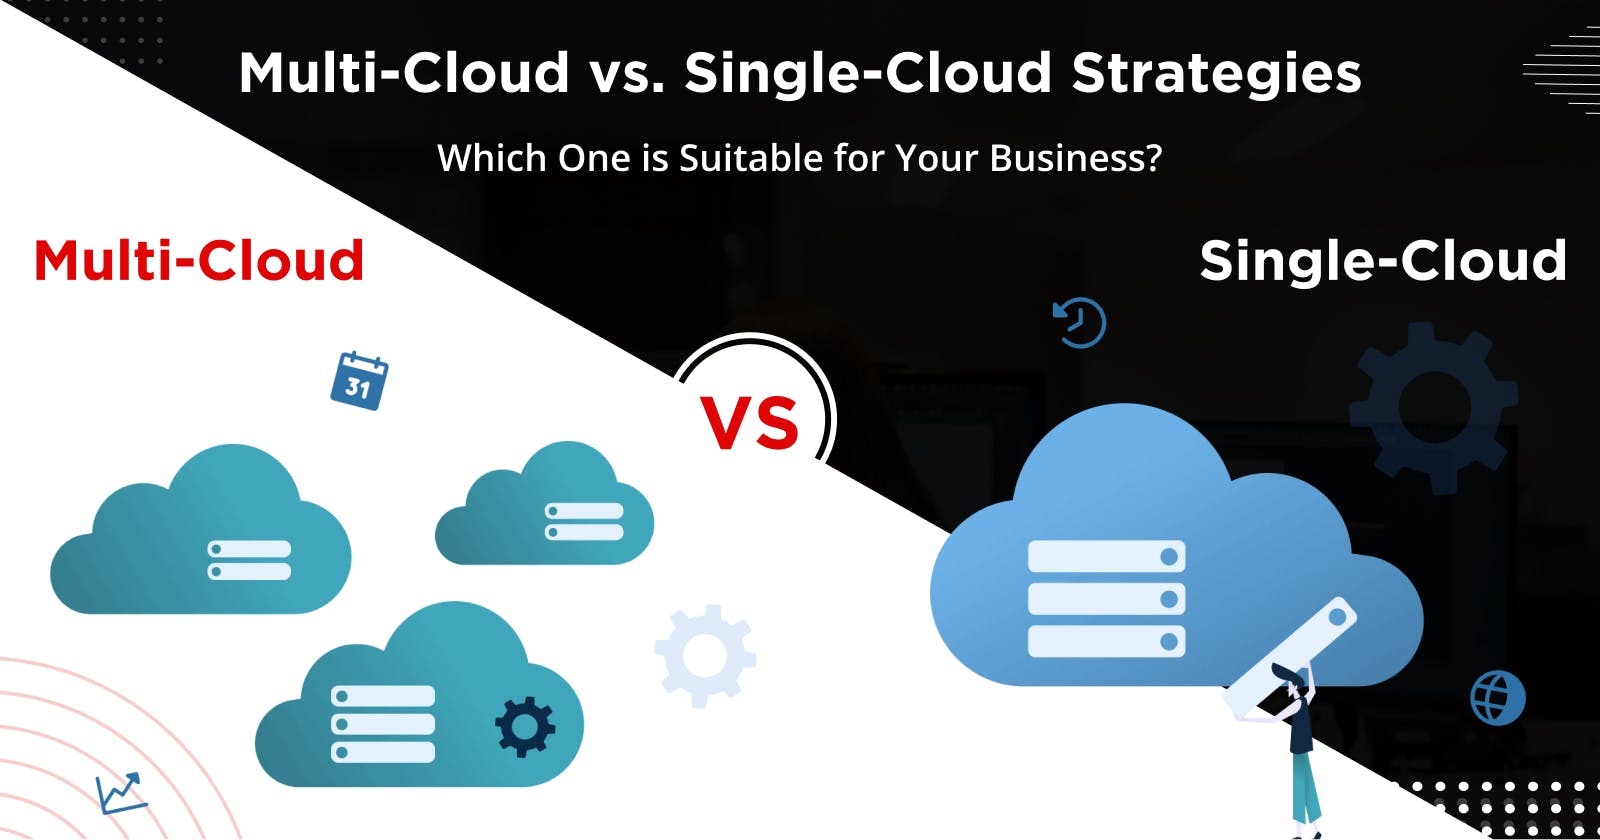 Multi-Cloud vs. Single-Cloud Strategies: Which One is Suitable for Your Business?